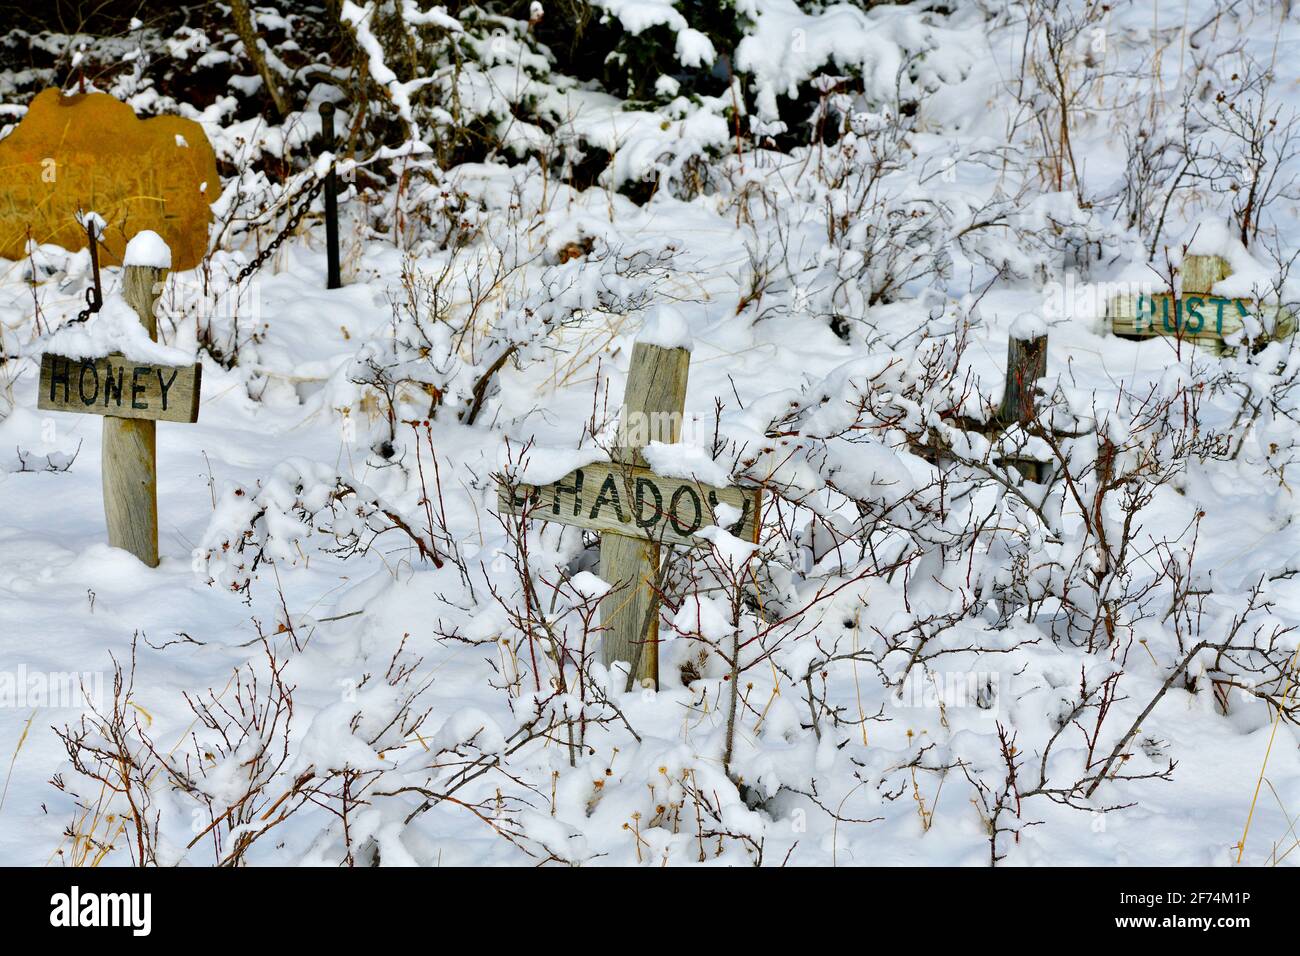 A winter image of a pet cemetery with fresh snow covering the ground in rural Alberta Canada Stock Photo